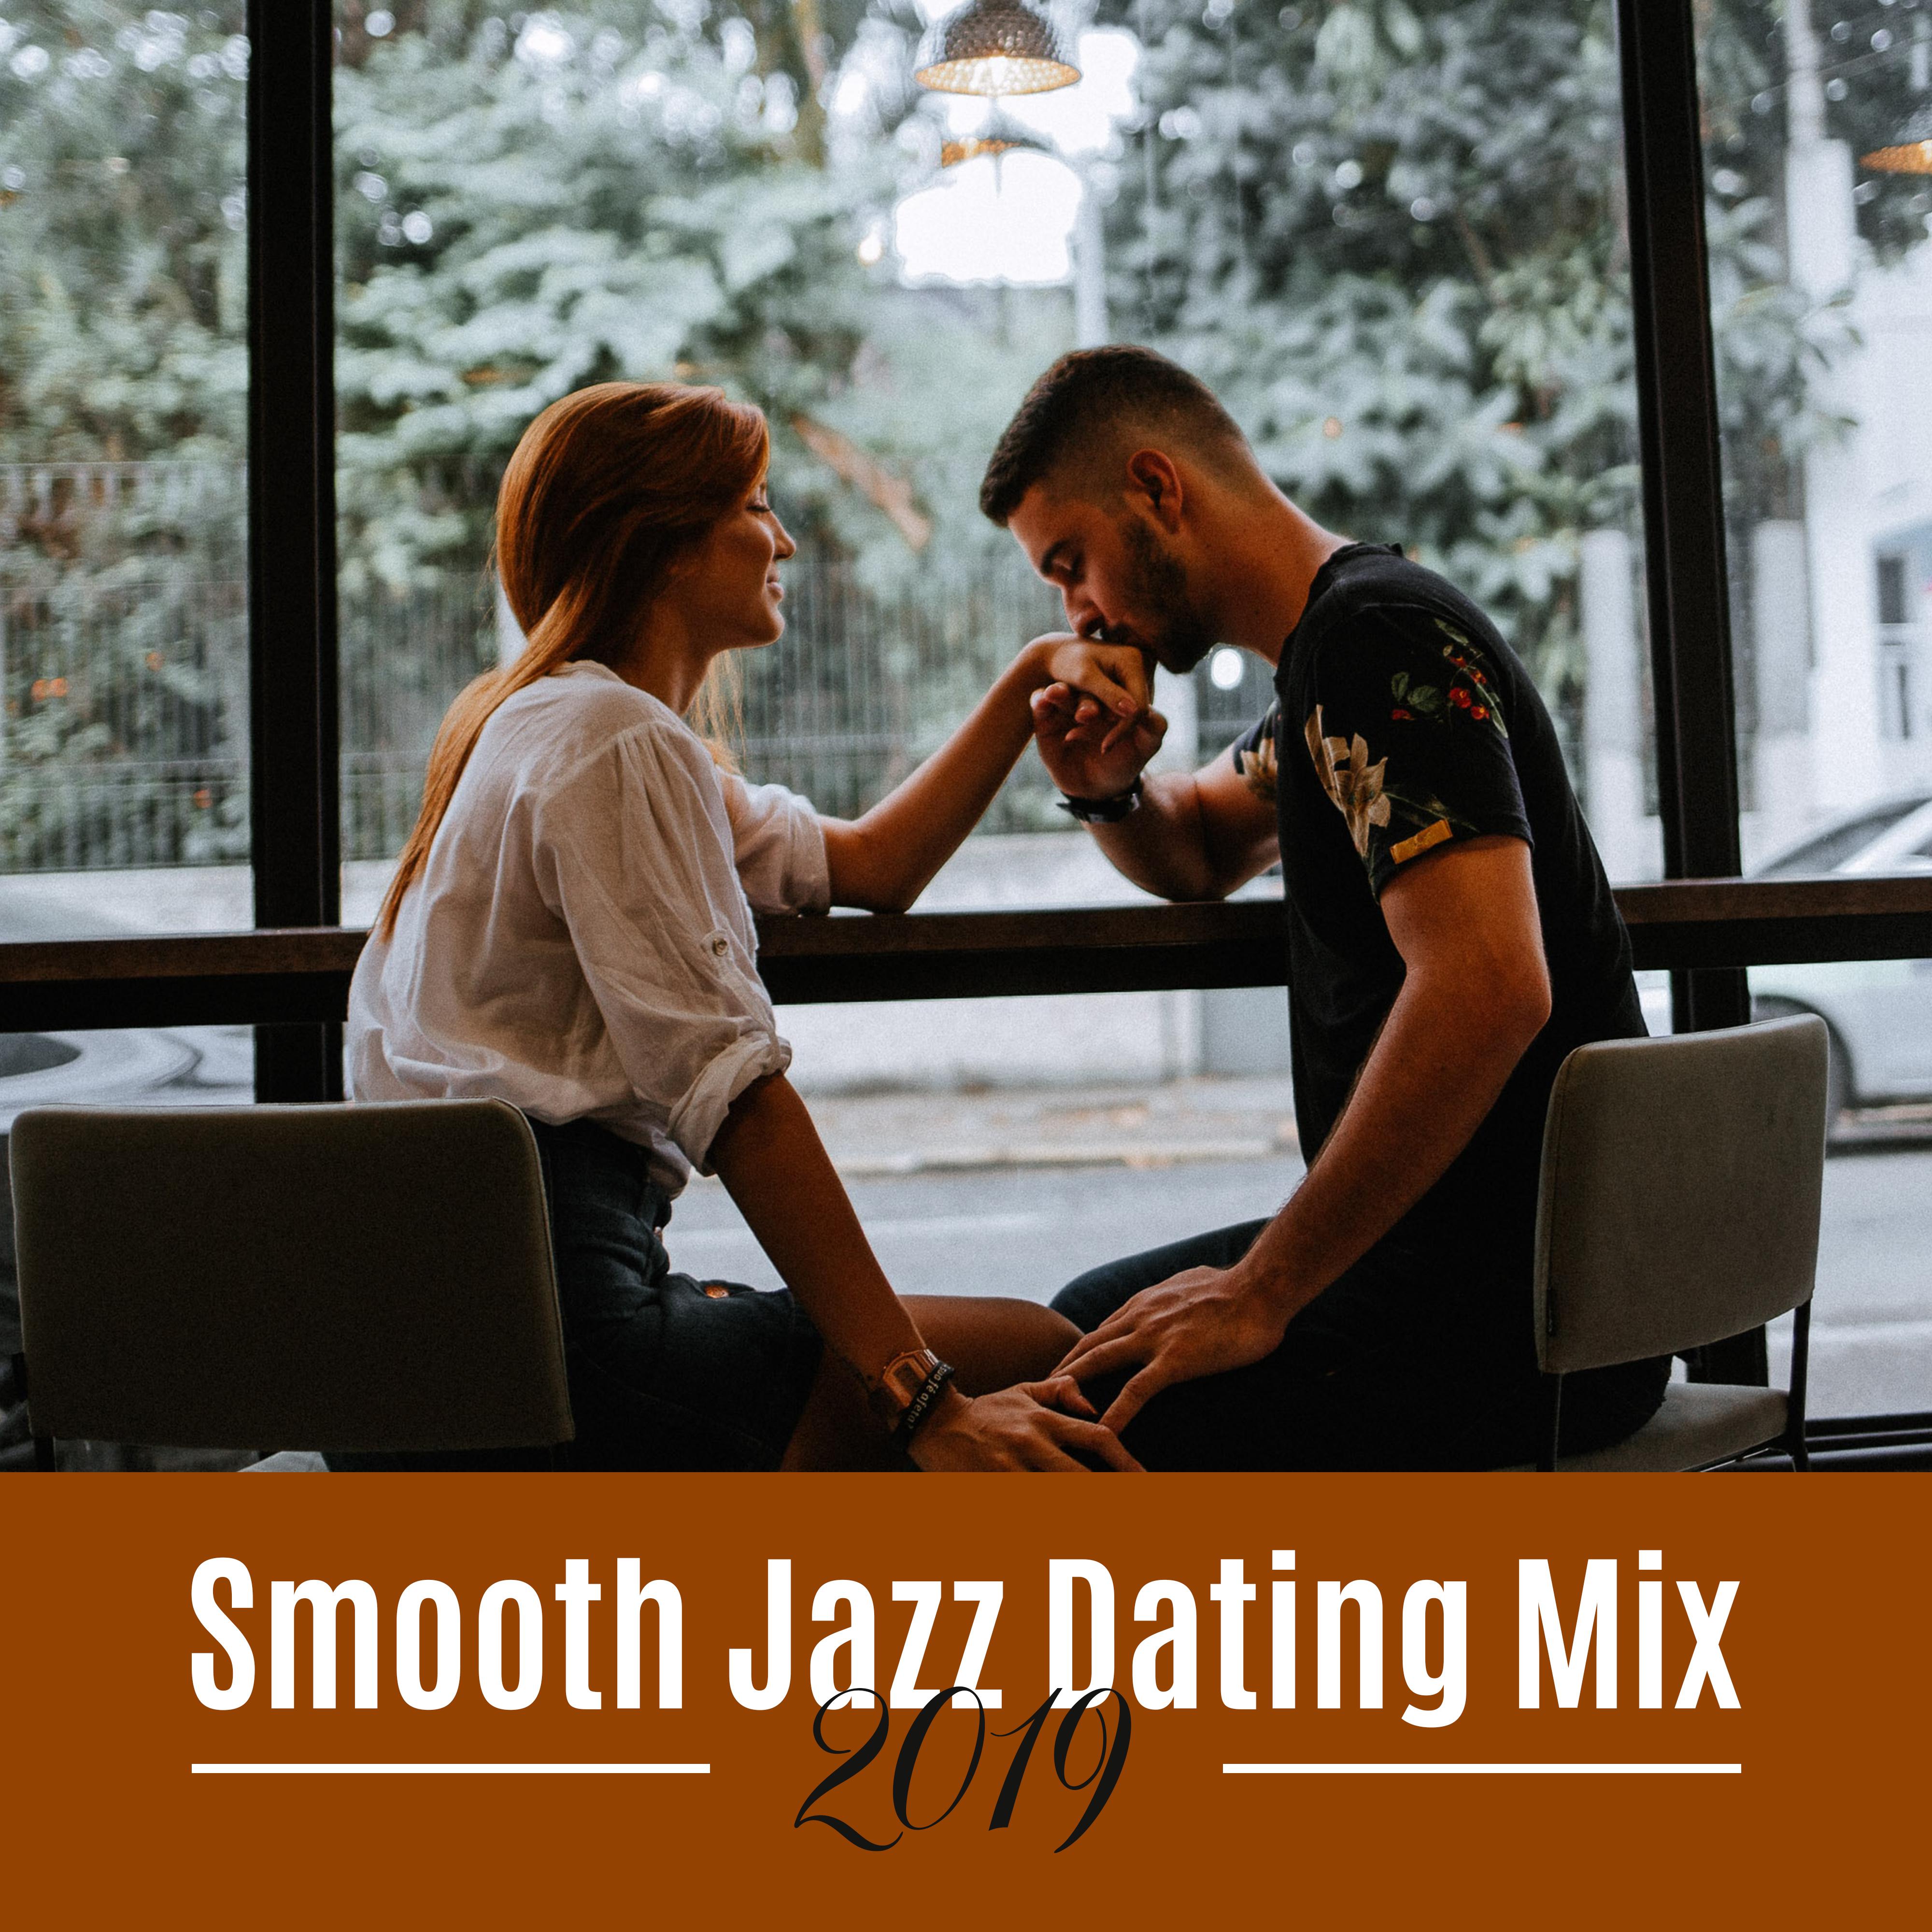 Smooth Jazz Dating Mix 2019: Soft Instrumental Jazz Music Collection for Couples, Background for Excelent Romantic Date in Restaurant, Delicate Guitar, Piano & Sax Melodies